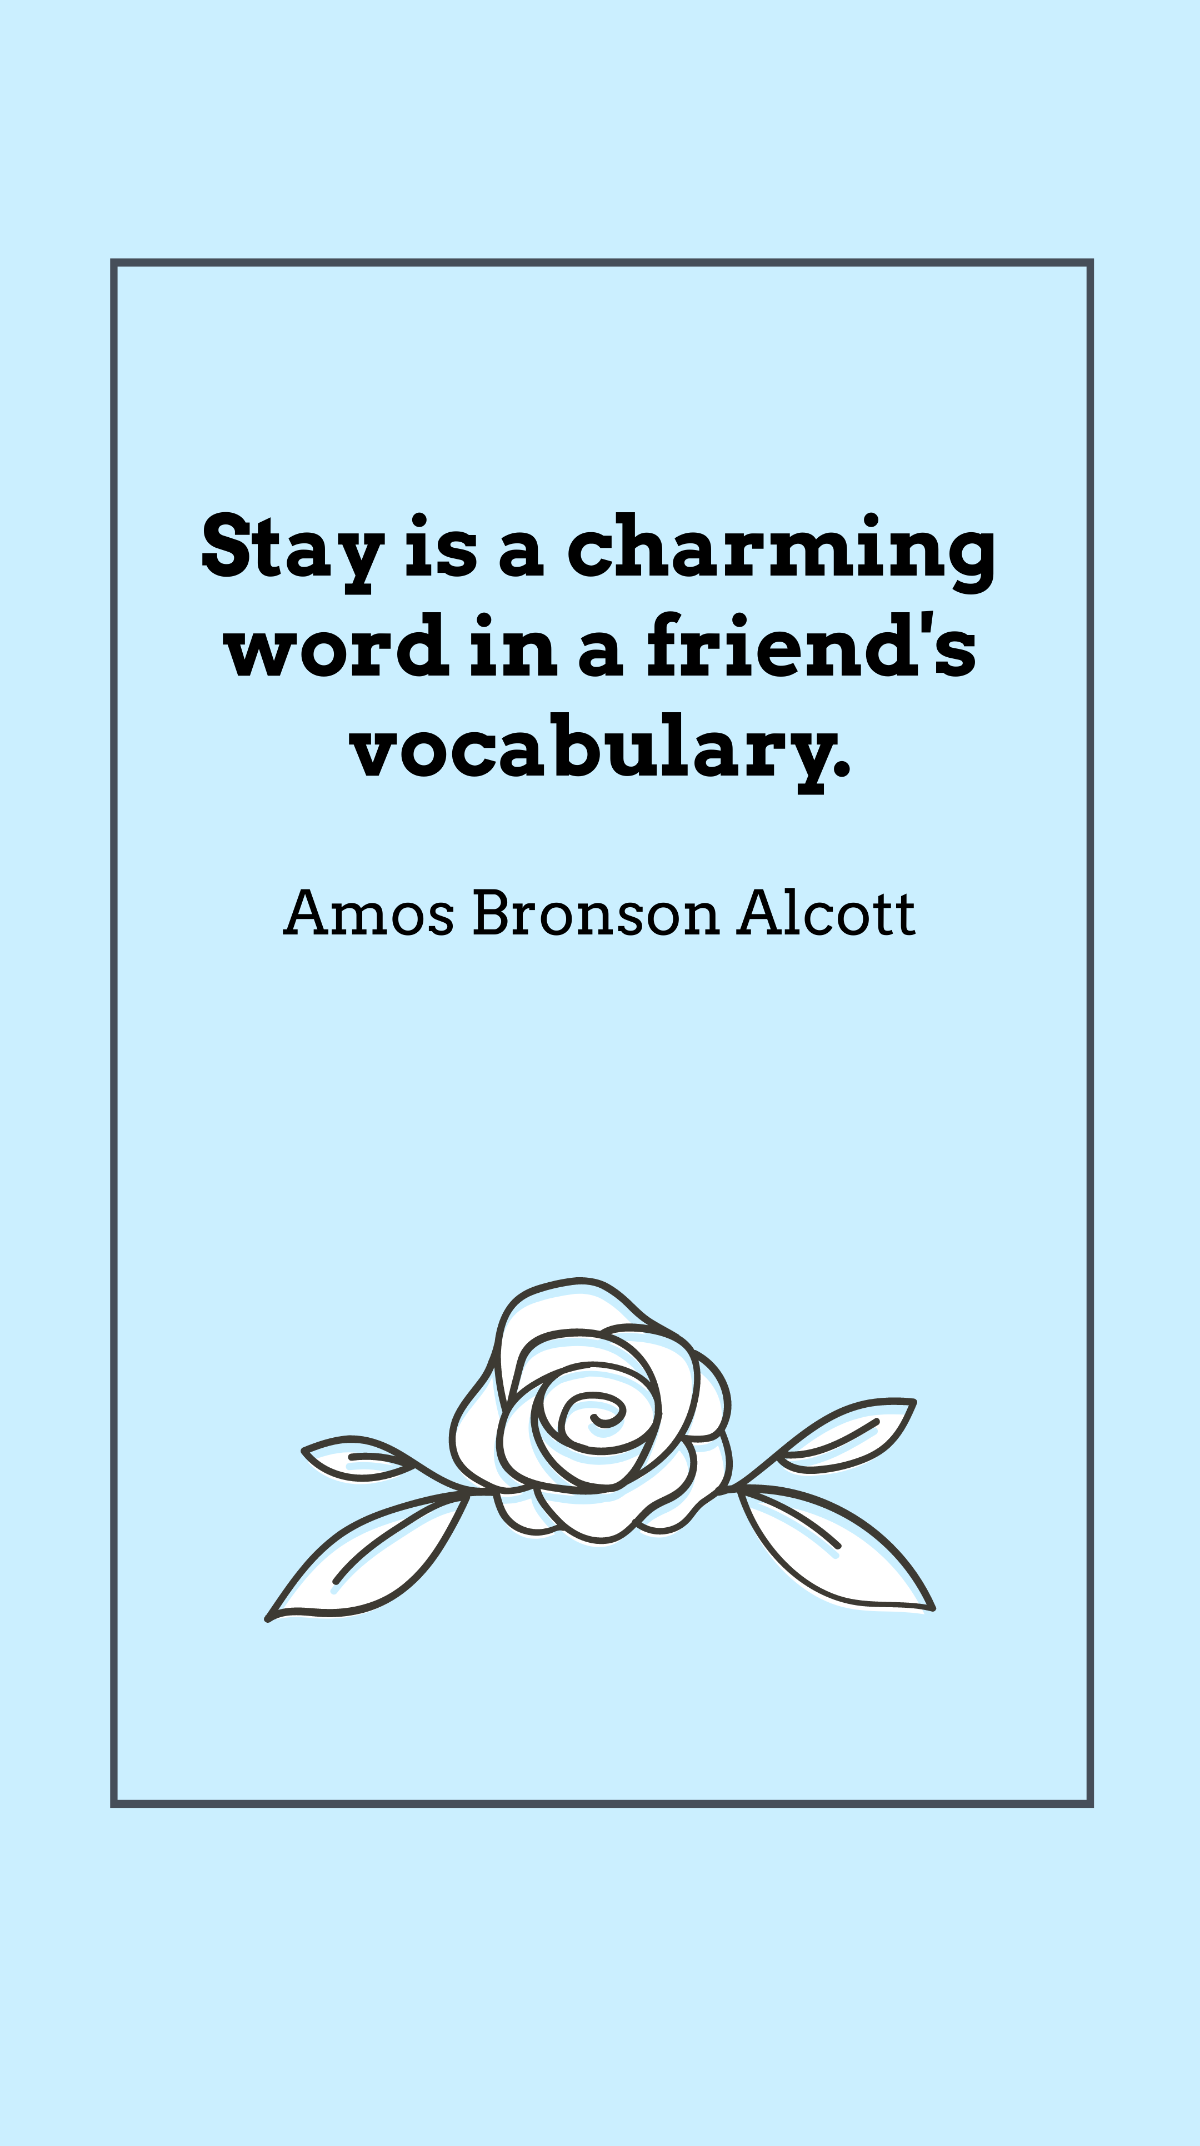 Amos Bronson Alcott - Stay is a charming word in a friend's vocabulary. Template